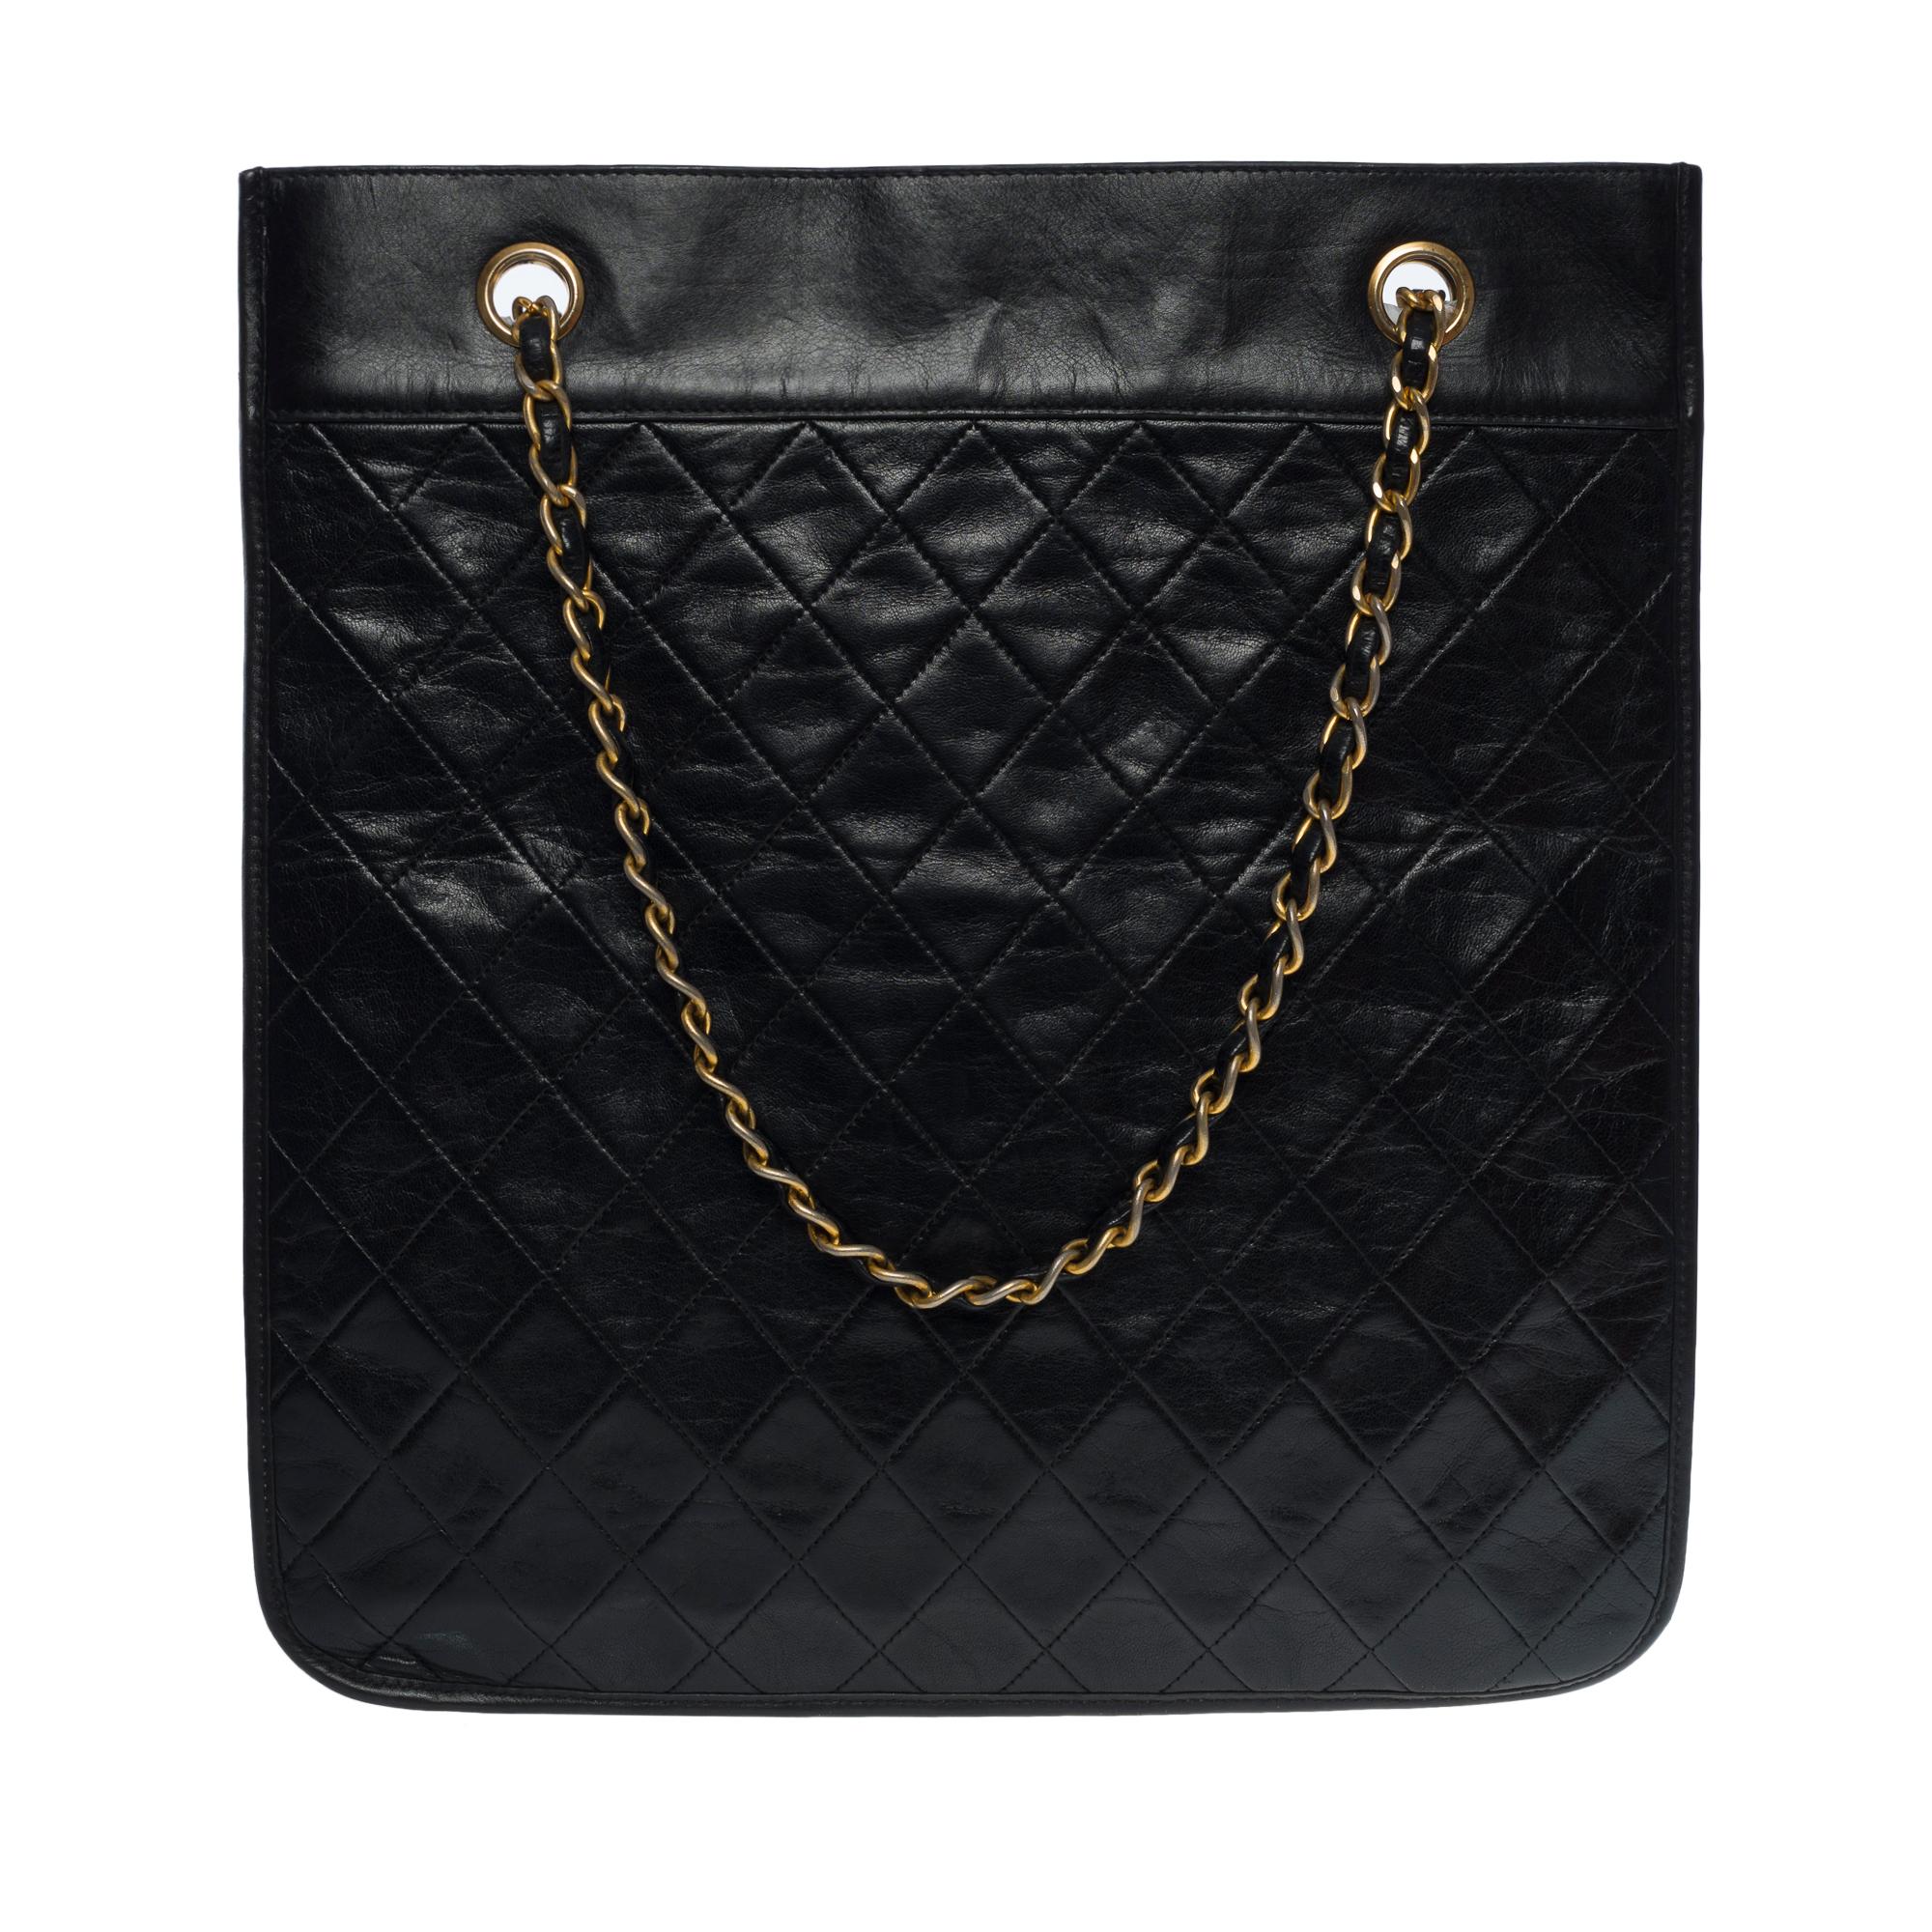 Gorgeous Chanel vintage flat tote bag in black quilted lambskin leather, black leather interlaced chain handle allowing a shoulder support

Burgundy leather interior, 1 patch pocket
Signature: “Chanel Paris Made in France”
Date: Circa